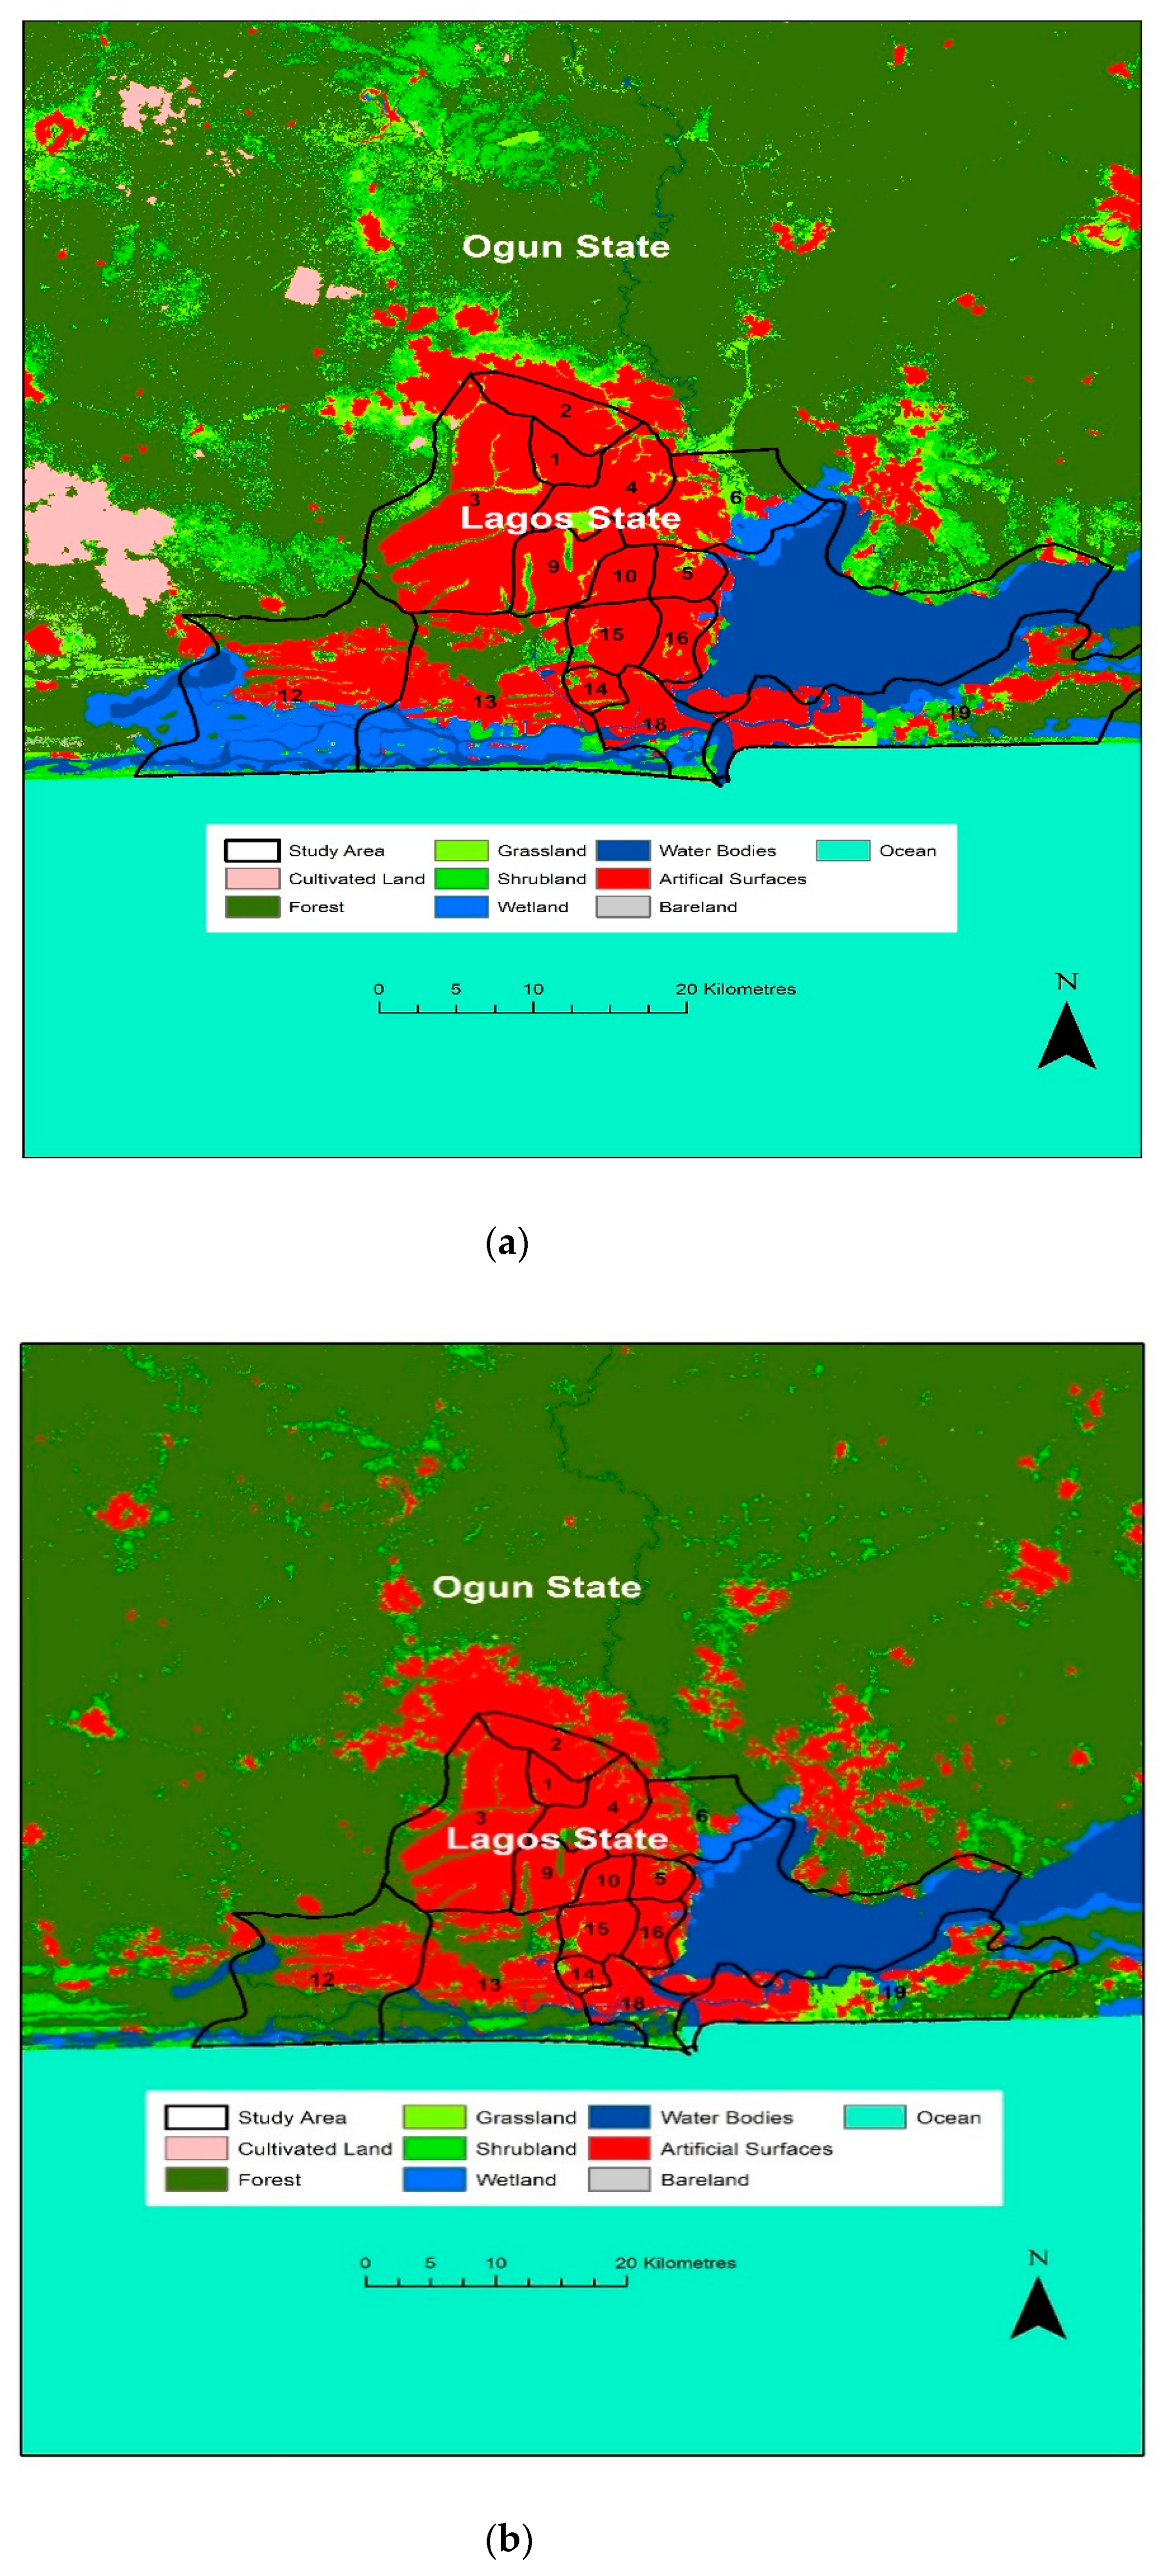 Sci Free Full Text Urban Sprawl And Growth Prediction For Lagos Using Globeland30 Data And Cellular Automata Model Html